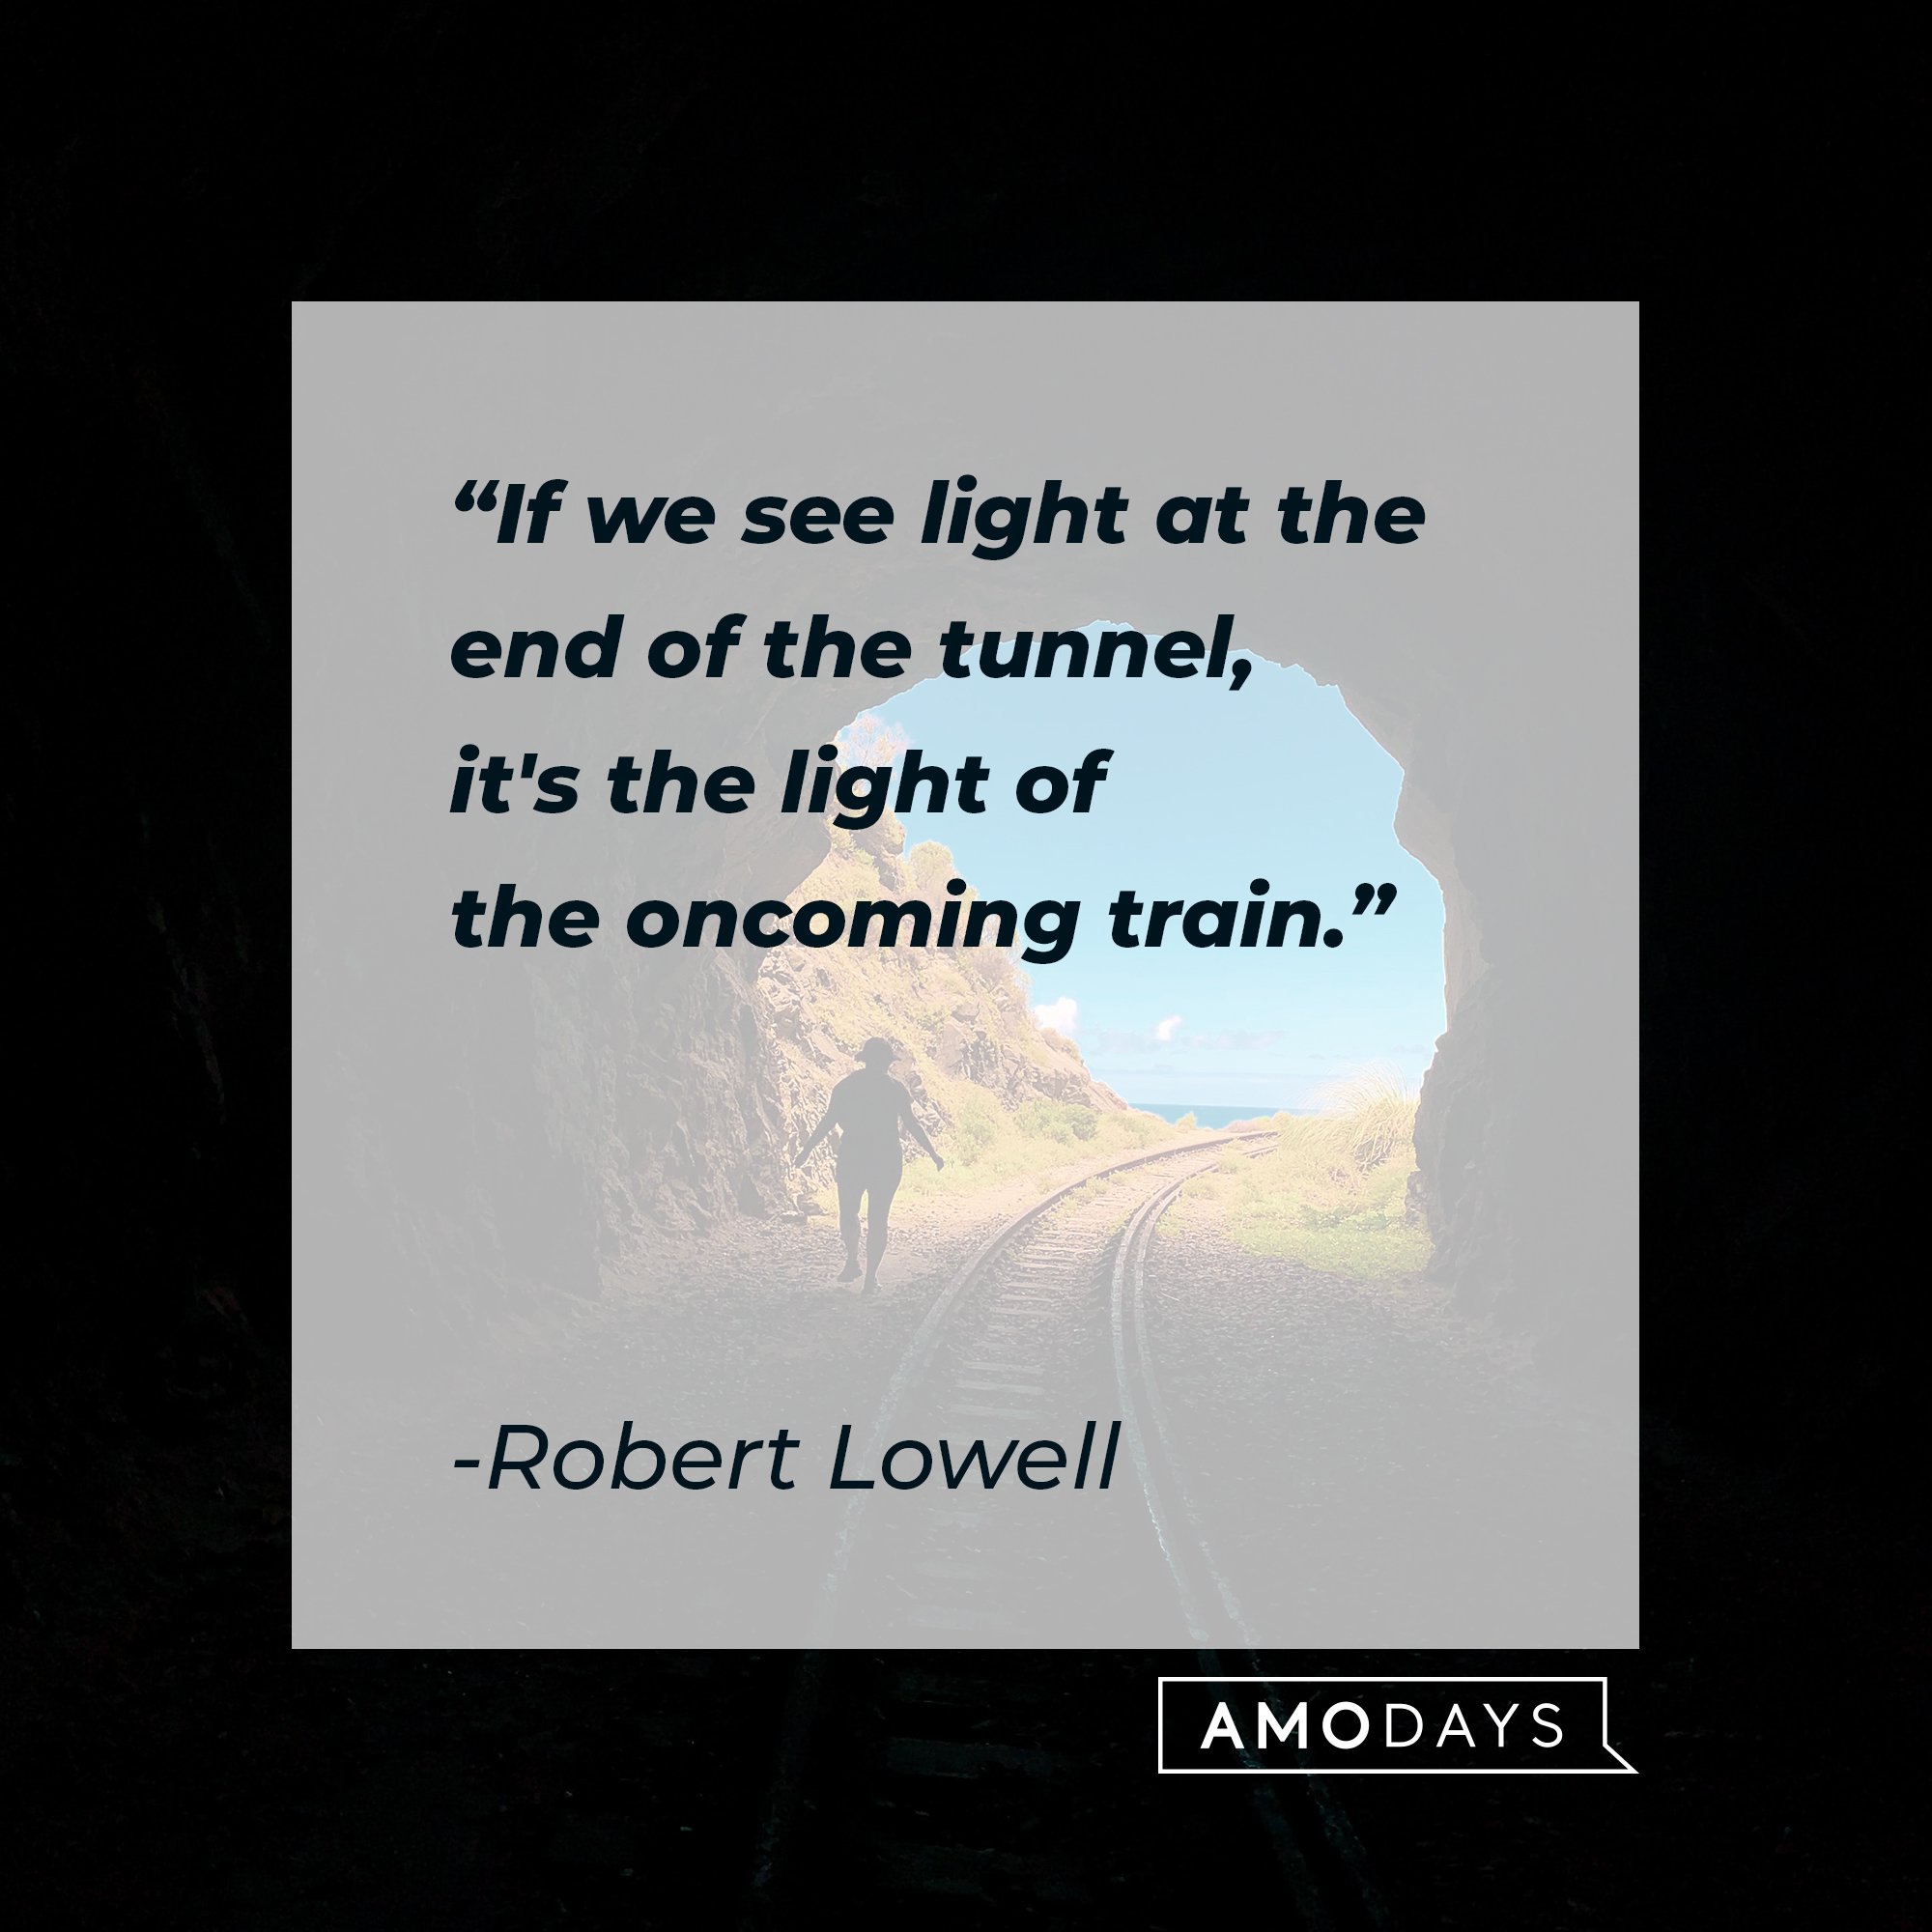 Robert Lowell's quote: "If we see light at the end of the tunnel, it's the light of the oncoming train." | Image: AmoDays